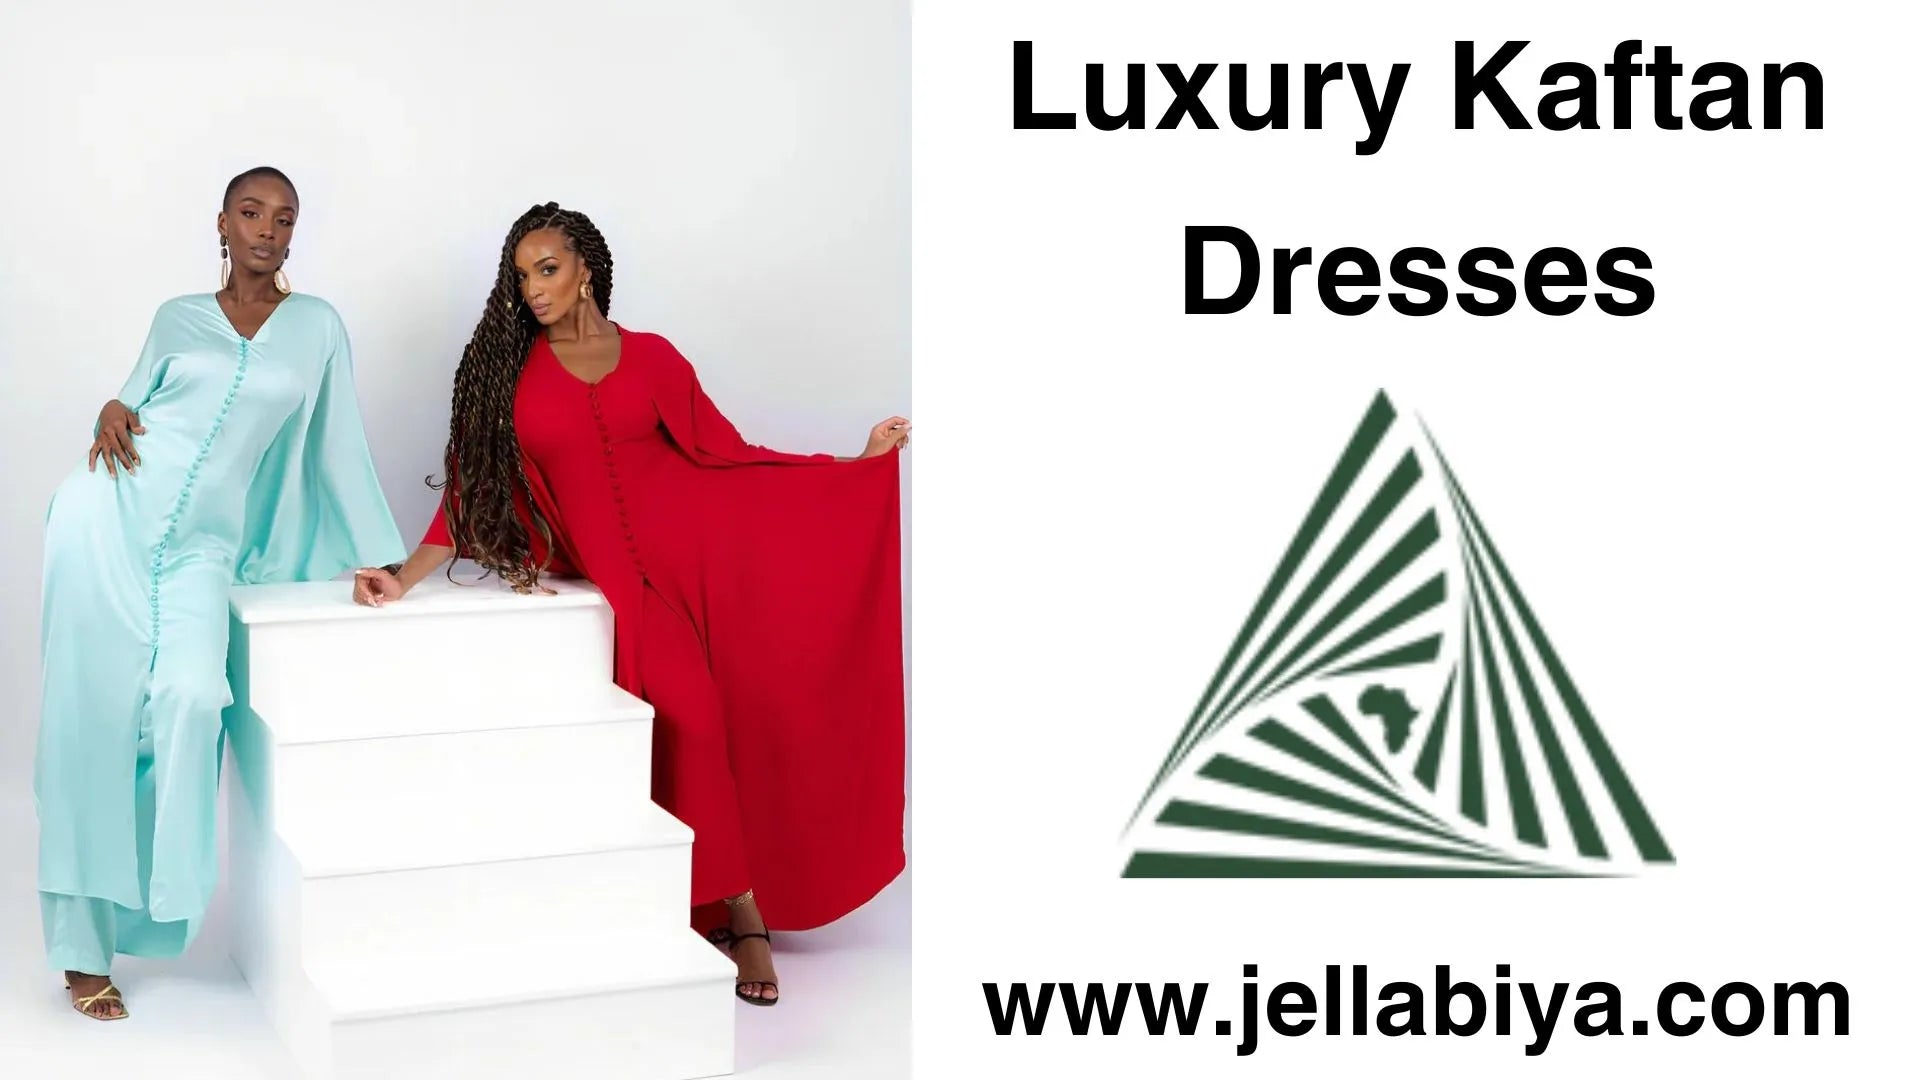 Luxury Kaftan Dresses The Ultimate in Comfort and Style